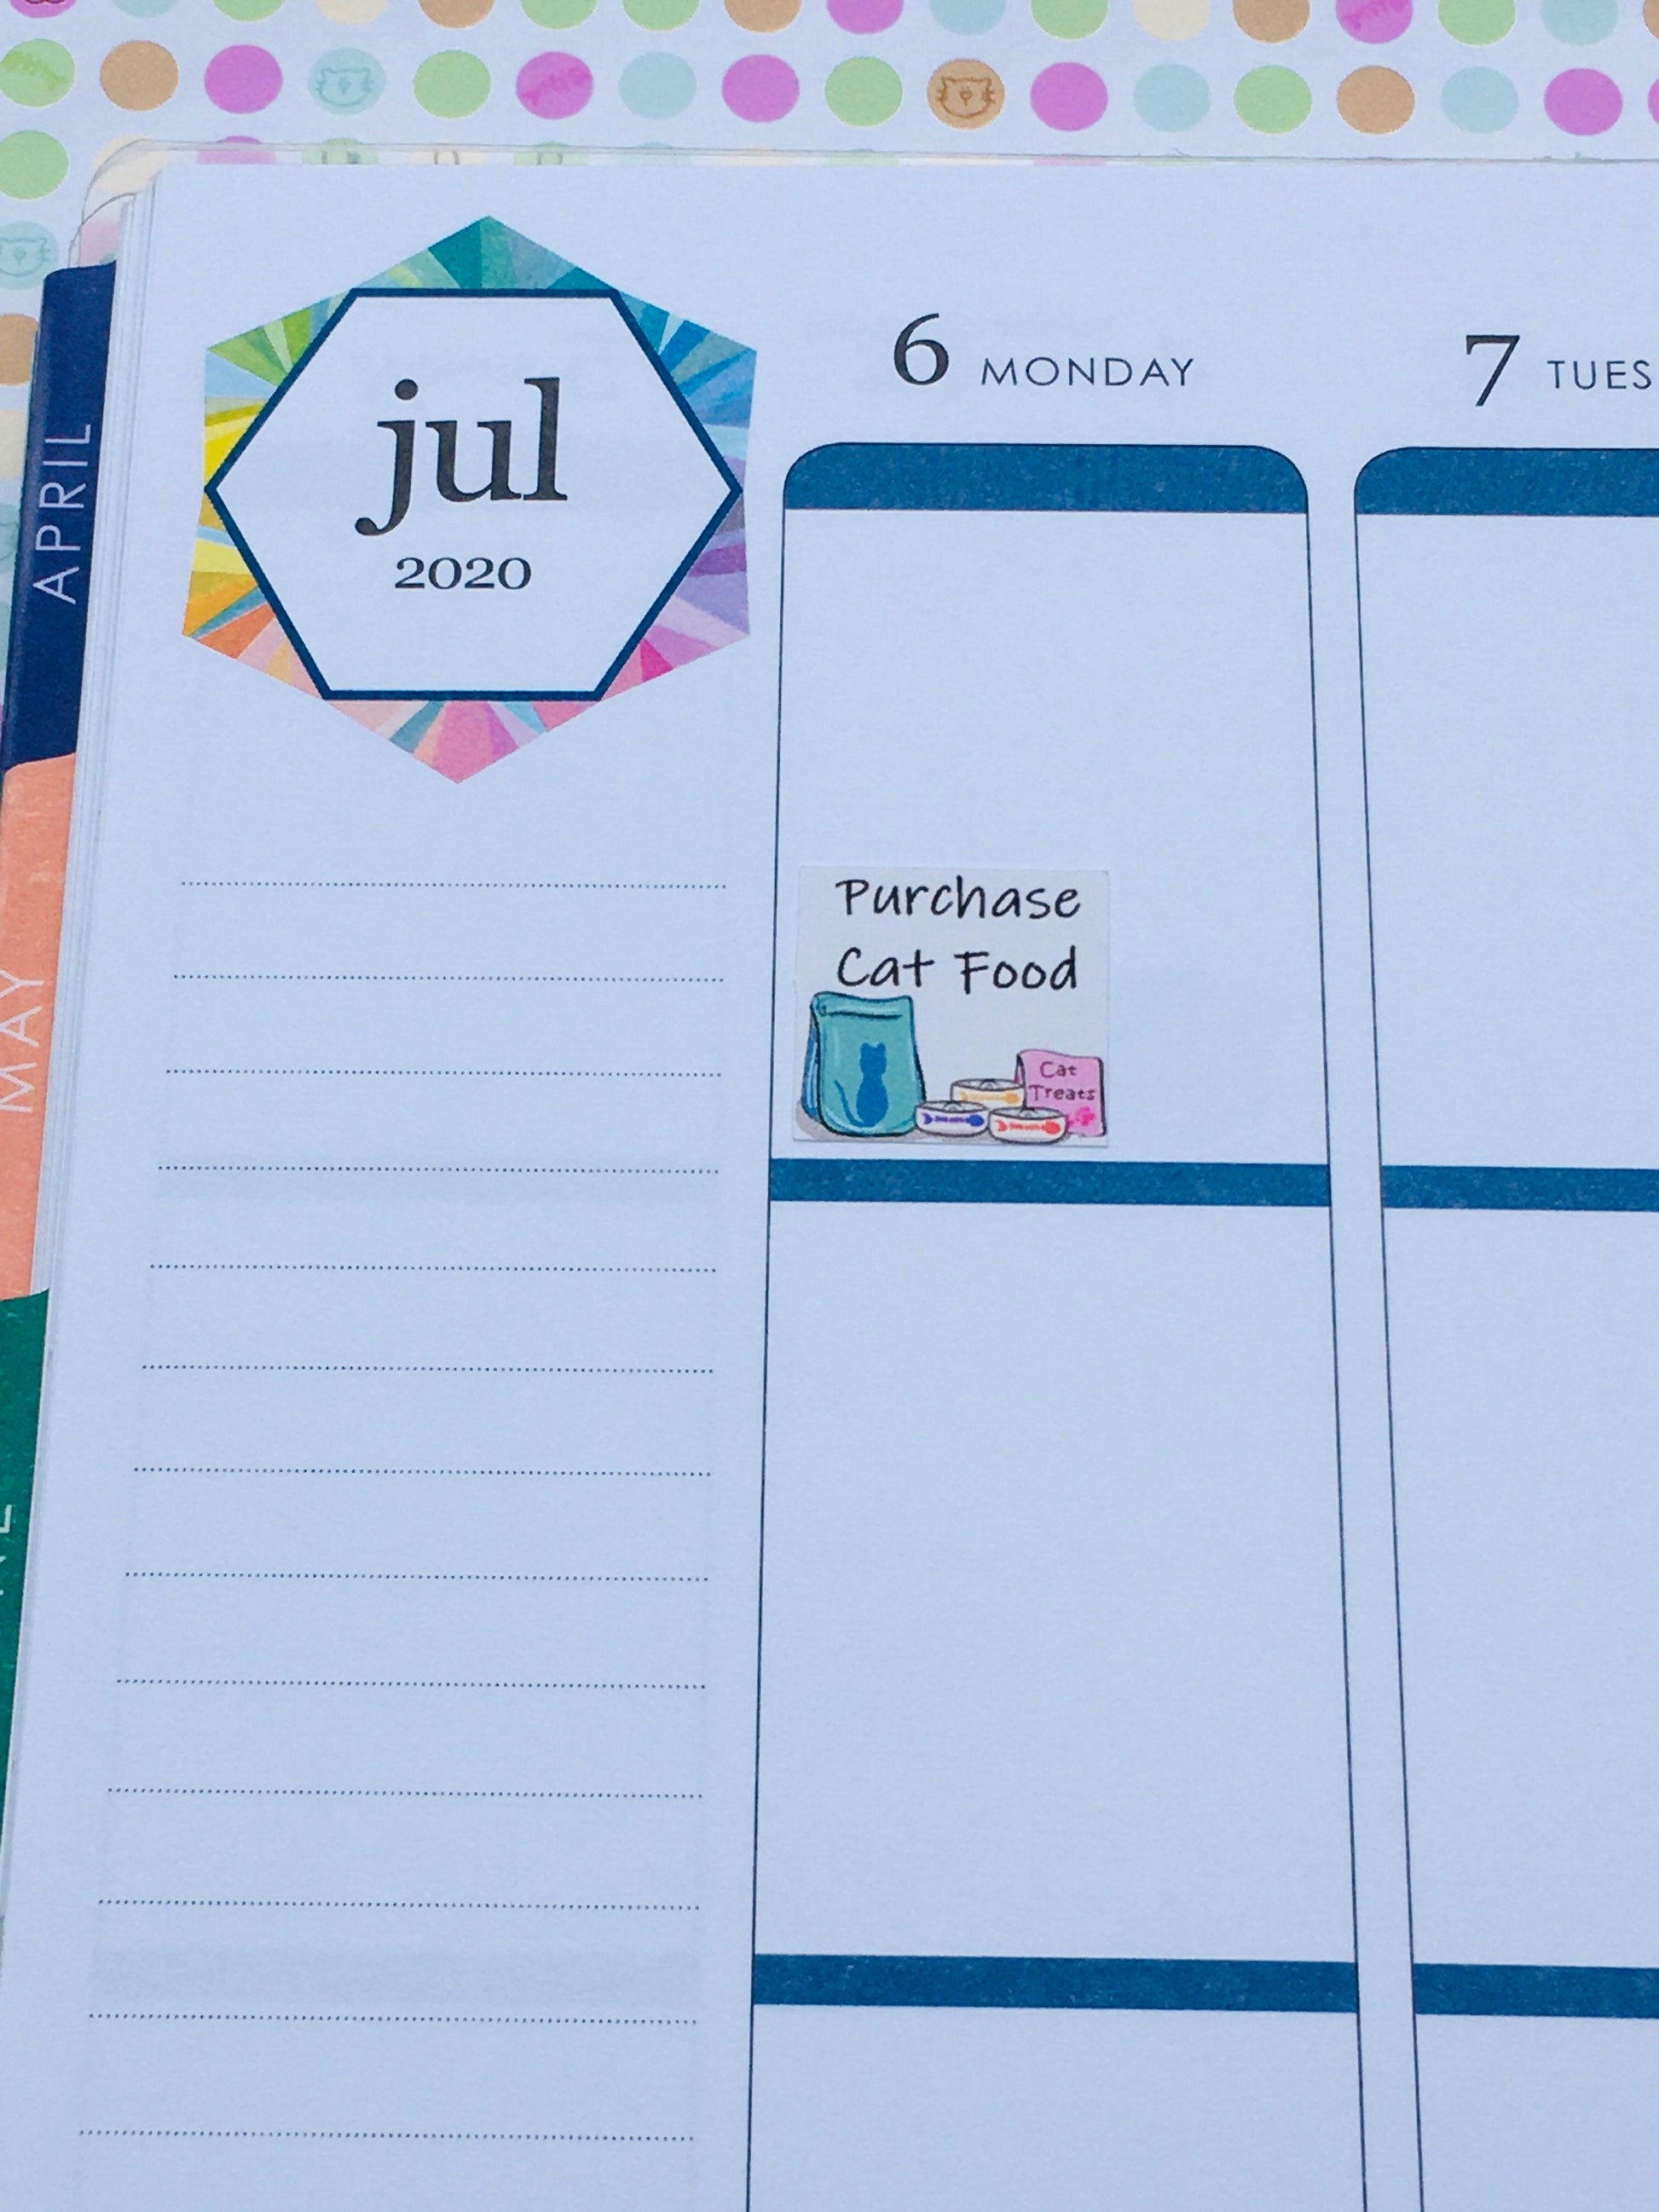 The Purchase Cat Food Planner Sticker on on daily page in a planner.